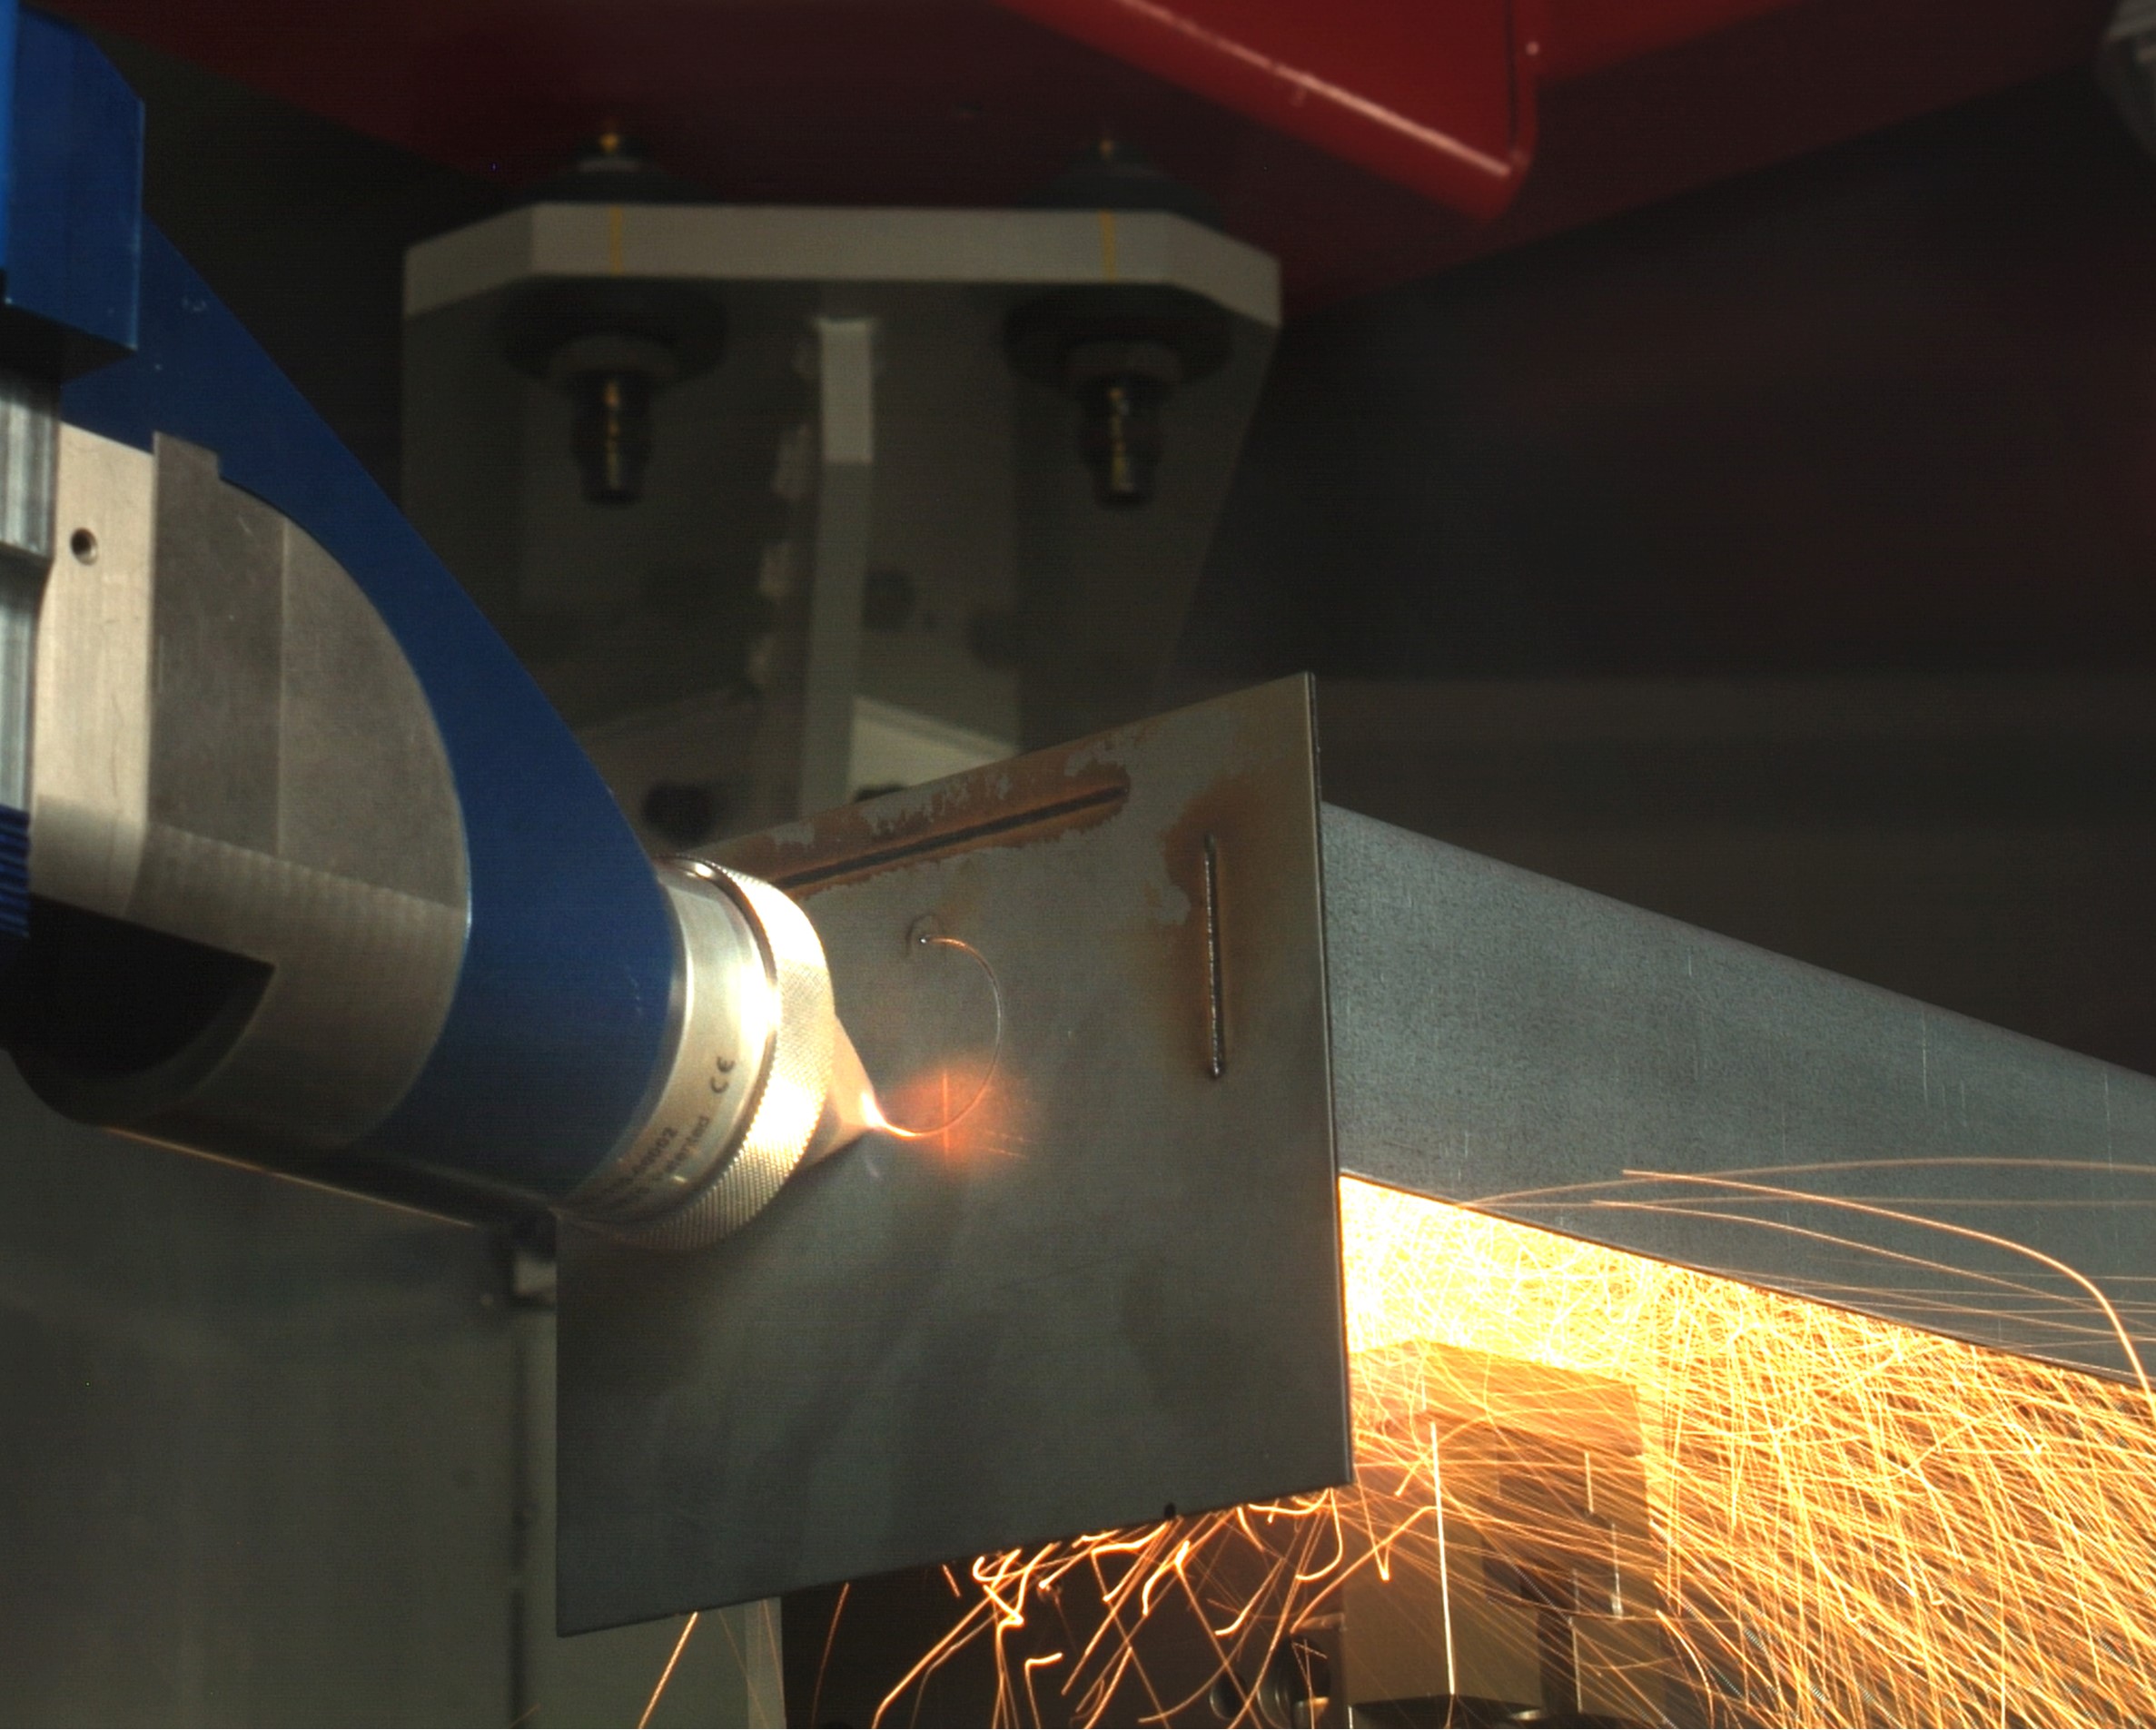 A multifunctional laser processing head plays a major role in the new NRW project MultiPROmobil; it enables innovative sheet metal assemblies through the integrated cutting, welding and manufacture of structures additively.